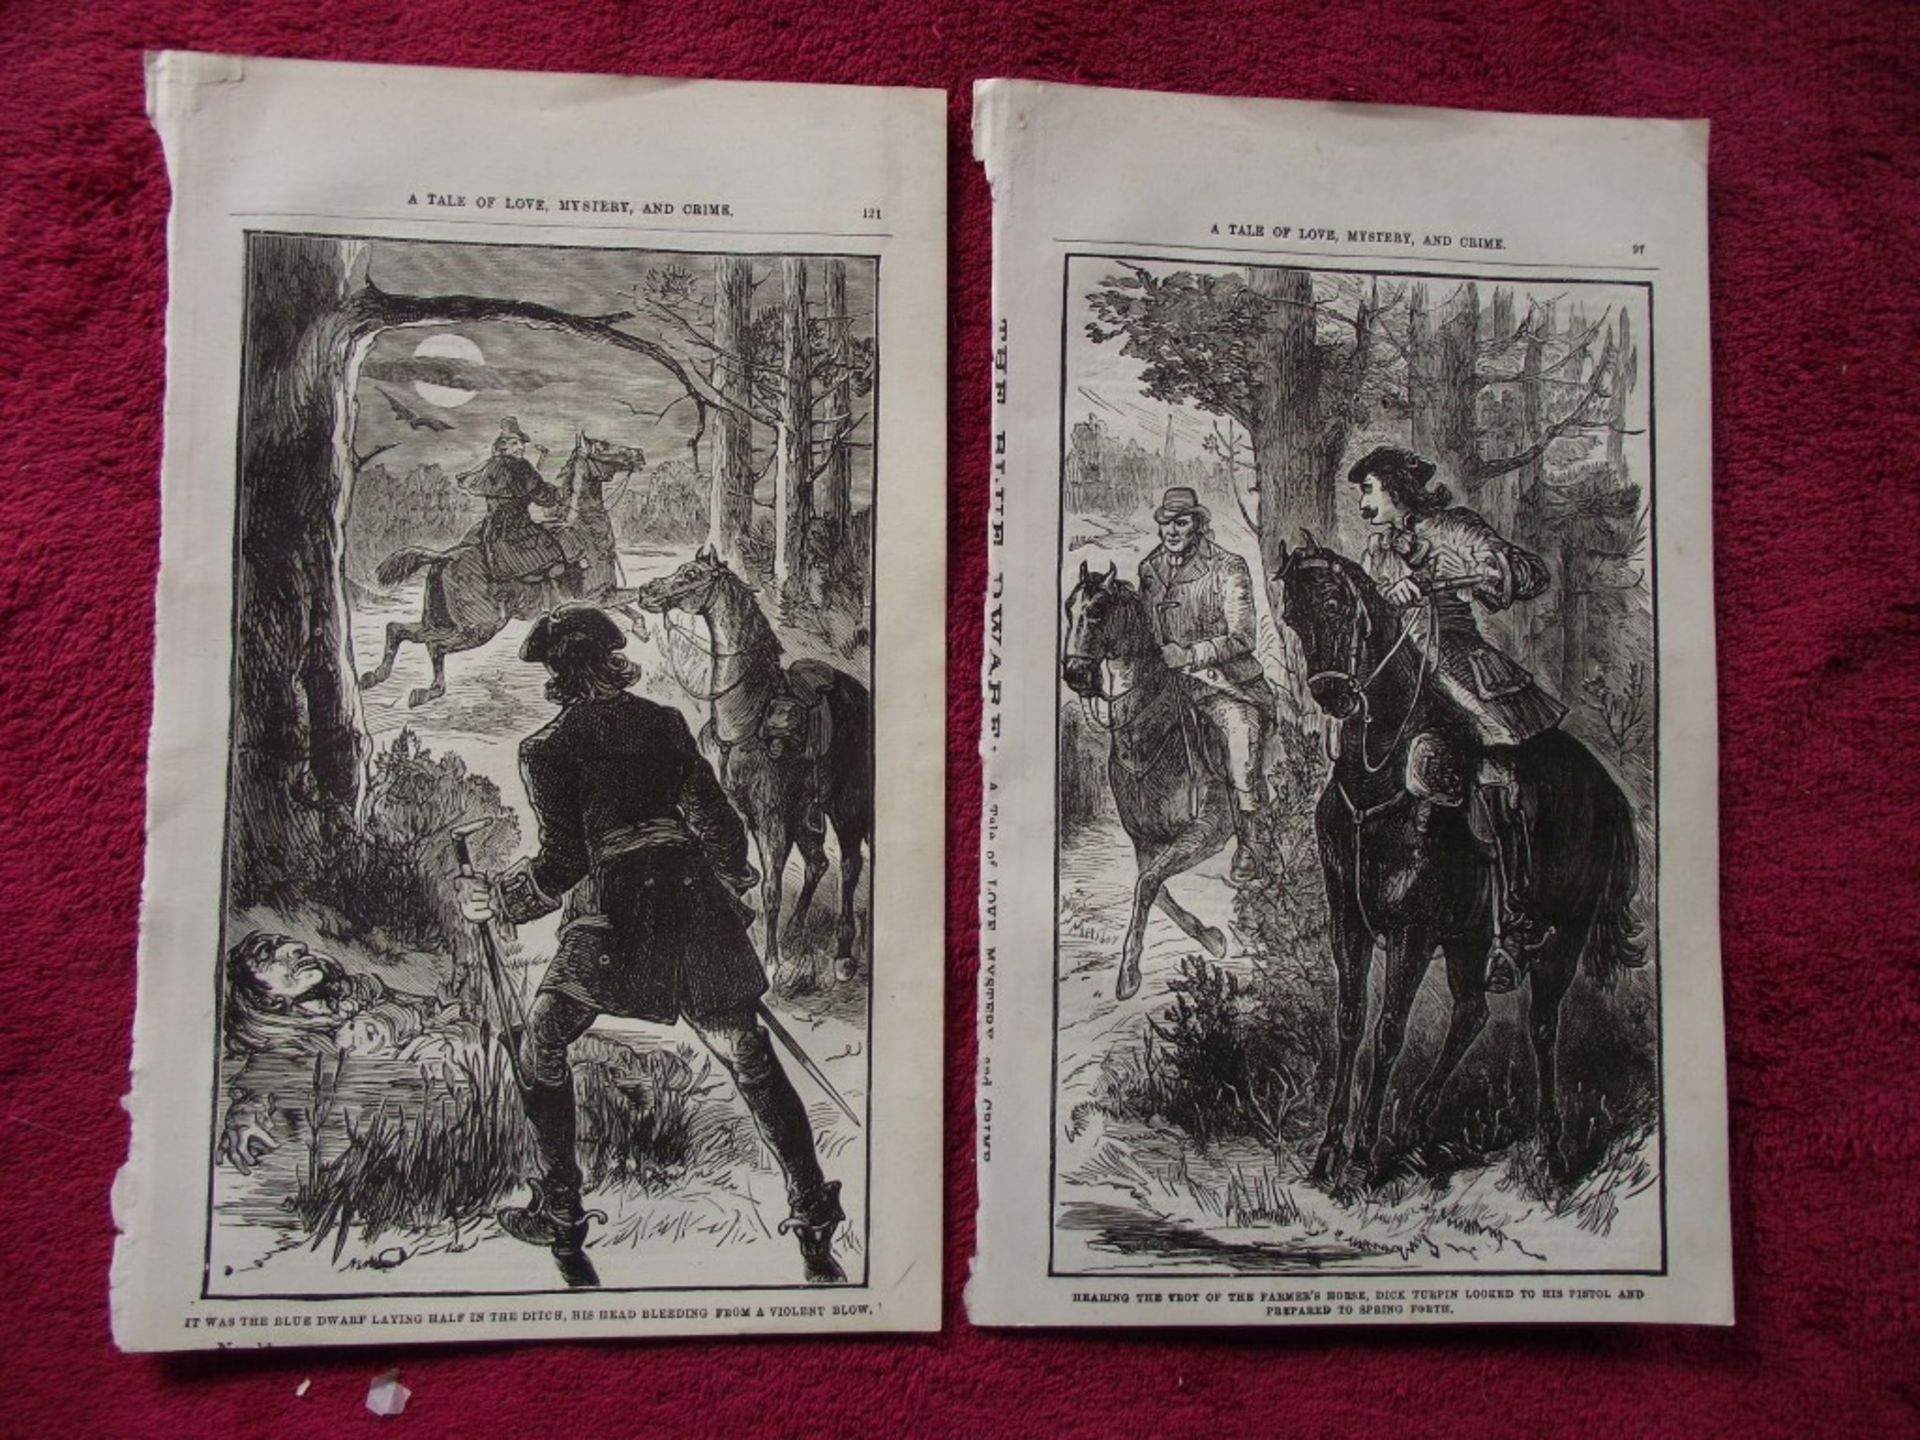 16 x Lithographic Prints From The Blue Dwarf - Percy B. St John - + 14 Prints - Circa 1880's - Image 28 of 39